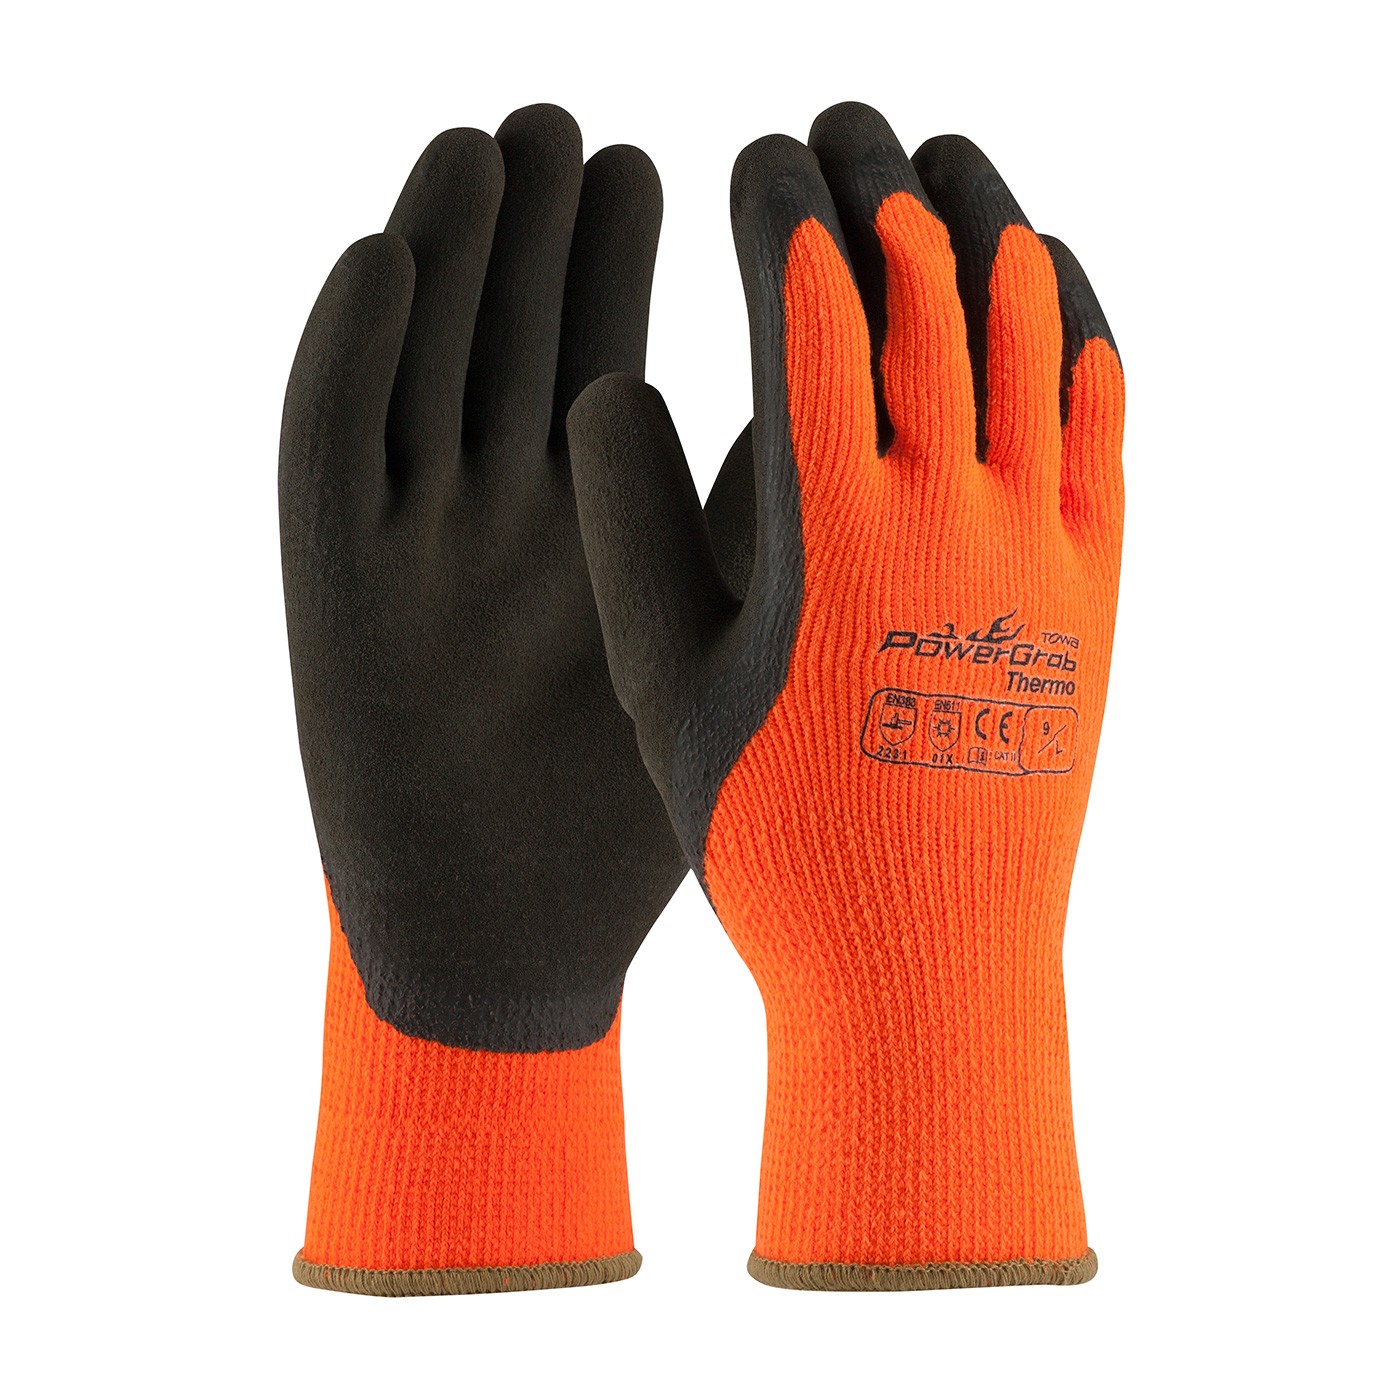 PowerGrab™ Thermo Hi-Vis Seamless Knit Acrylic Terry Glove with Latex MicroFinish Grip on Palm & Fingers  (#41-1400)